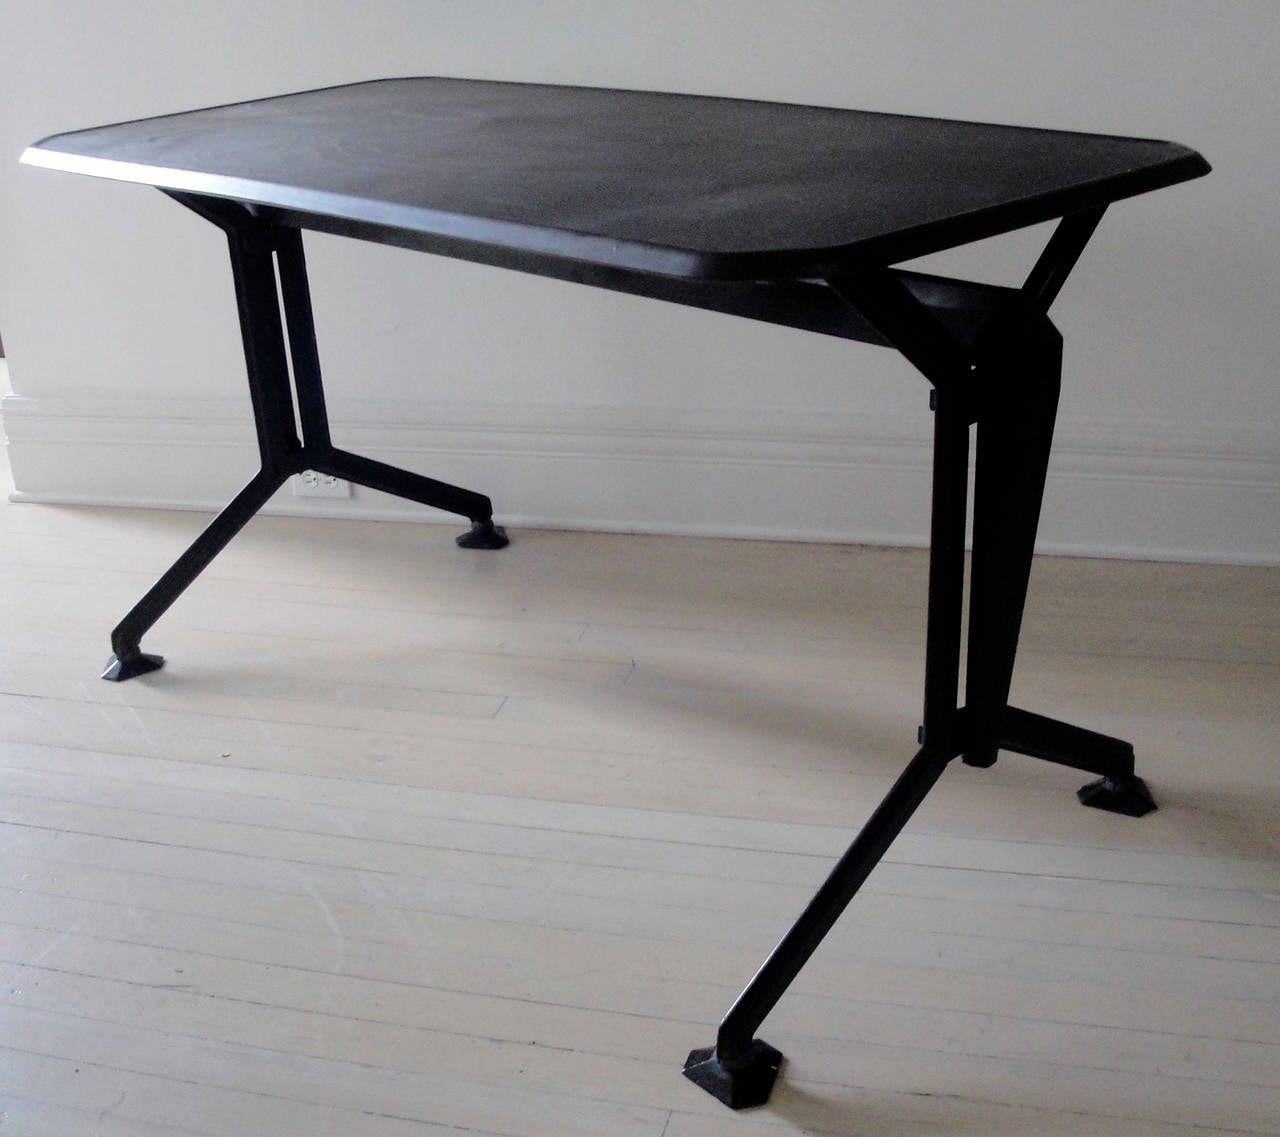 An Olivetti table with metal interlinked base and a bakelite top.